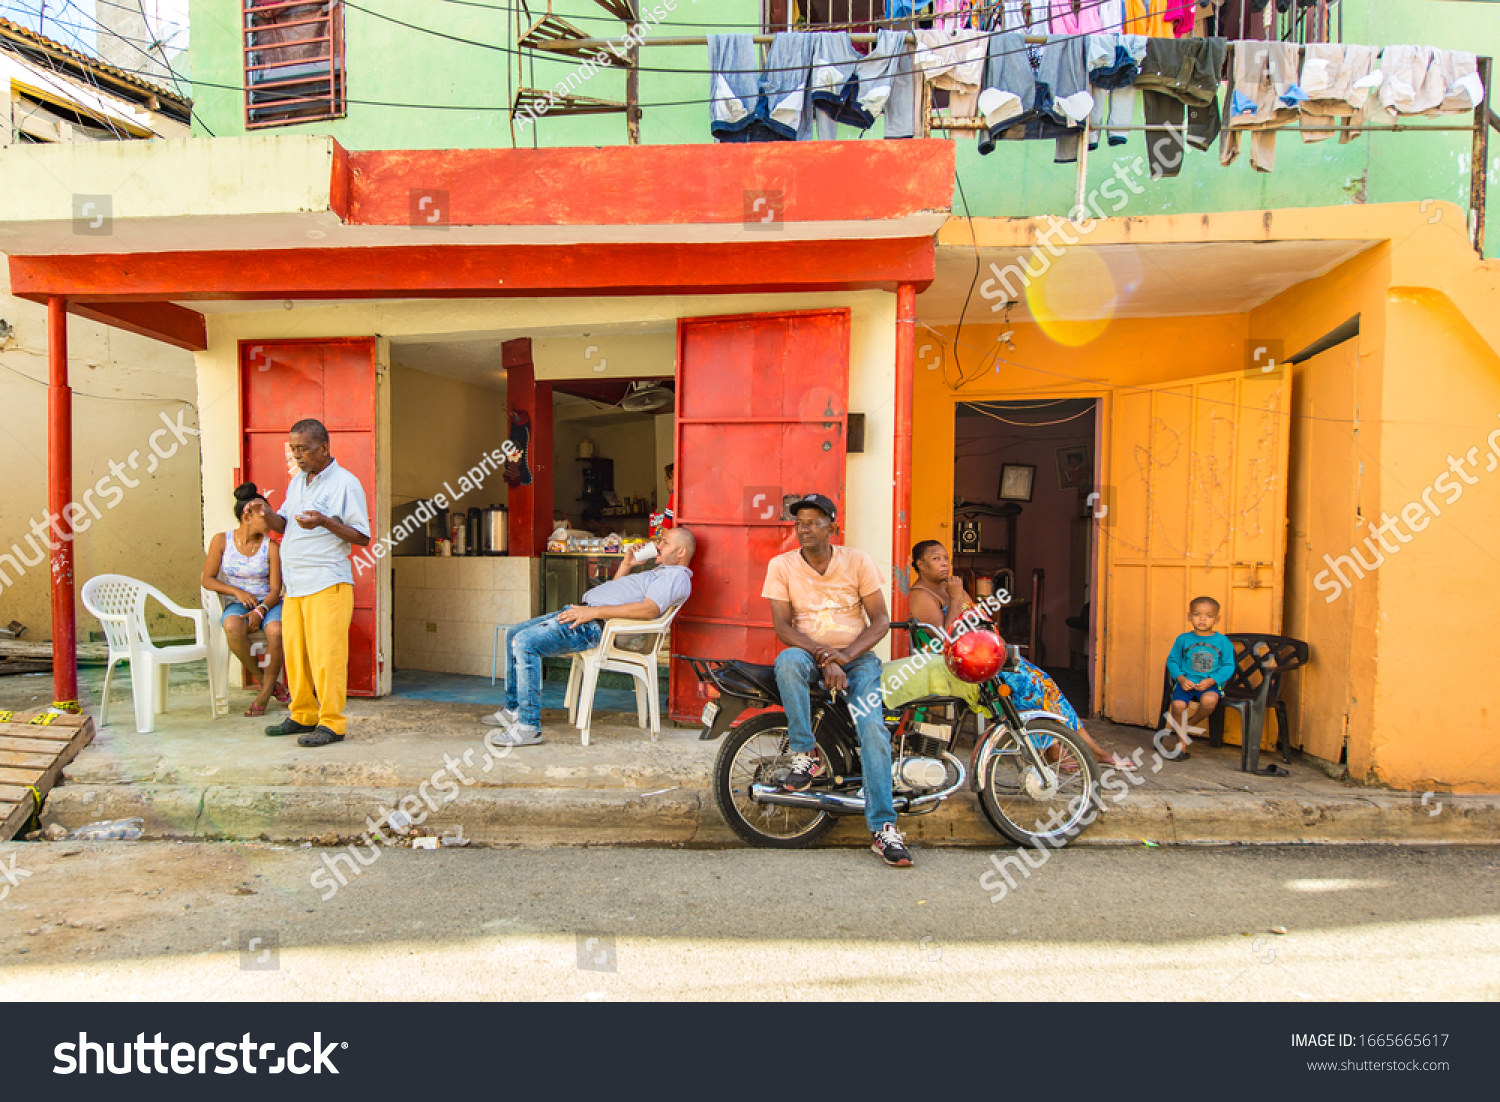 stock-photo-santo-domingo-dominican-republic-april-group-of-relaxed-people-some-sitting-having-a-1665665617.jpg